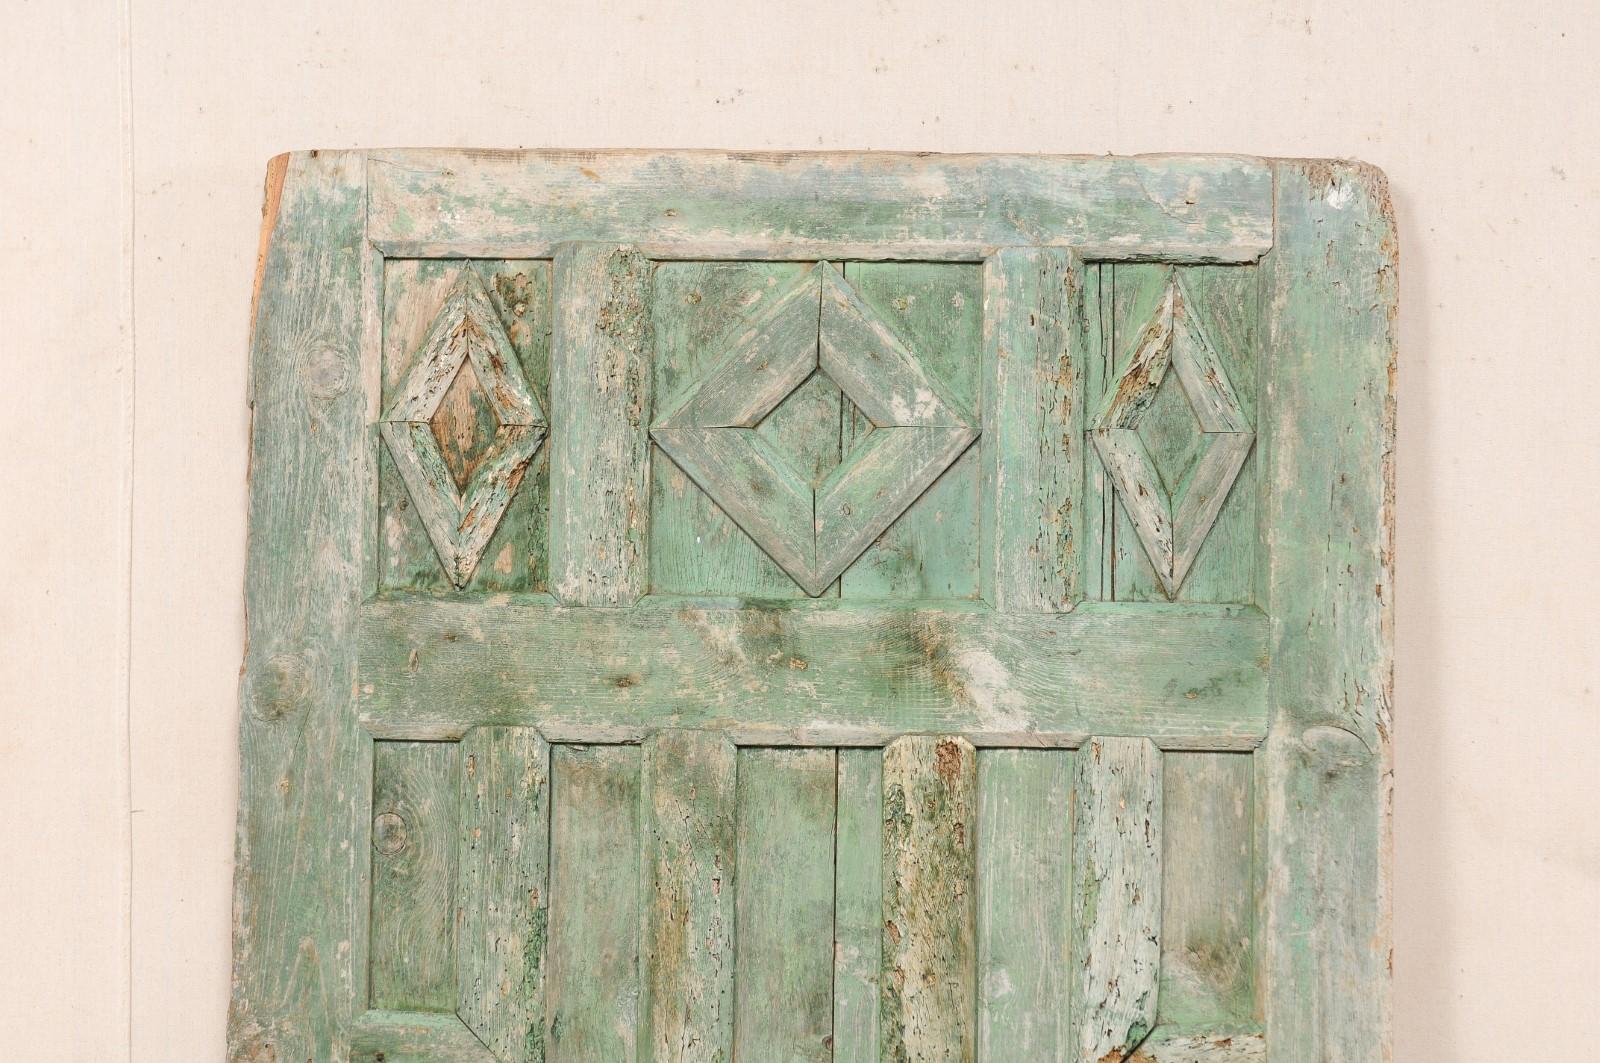 Spanish 19th Century Geometric Paneled Door with Its Original Green Paint In Good Condition For Sale In Atlanta, GA